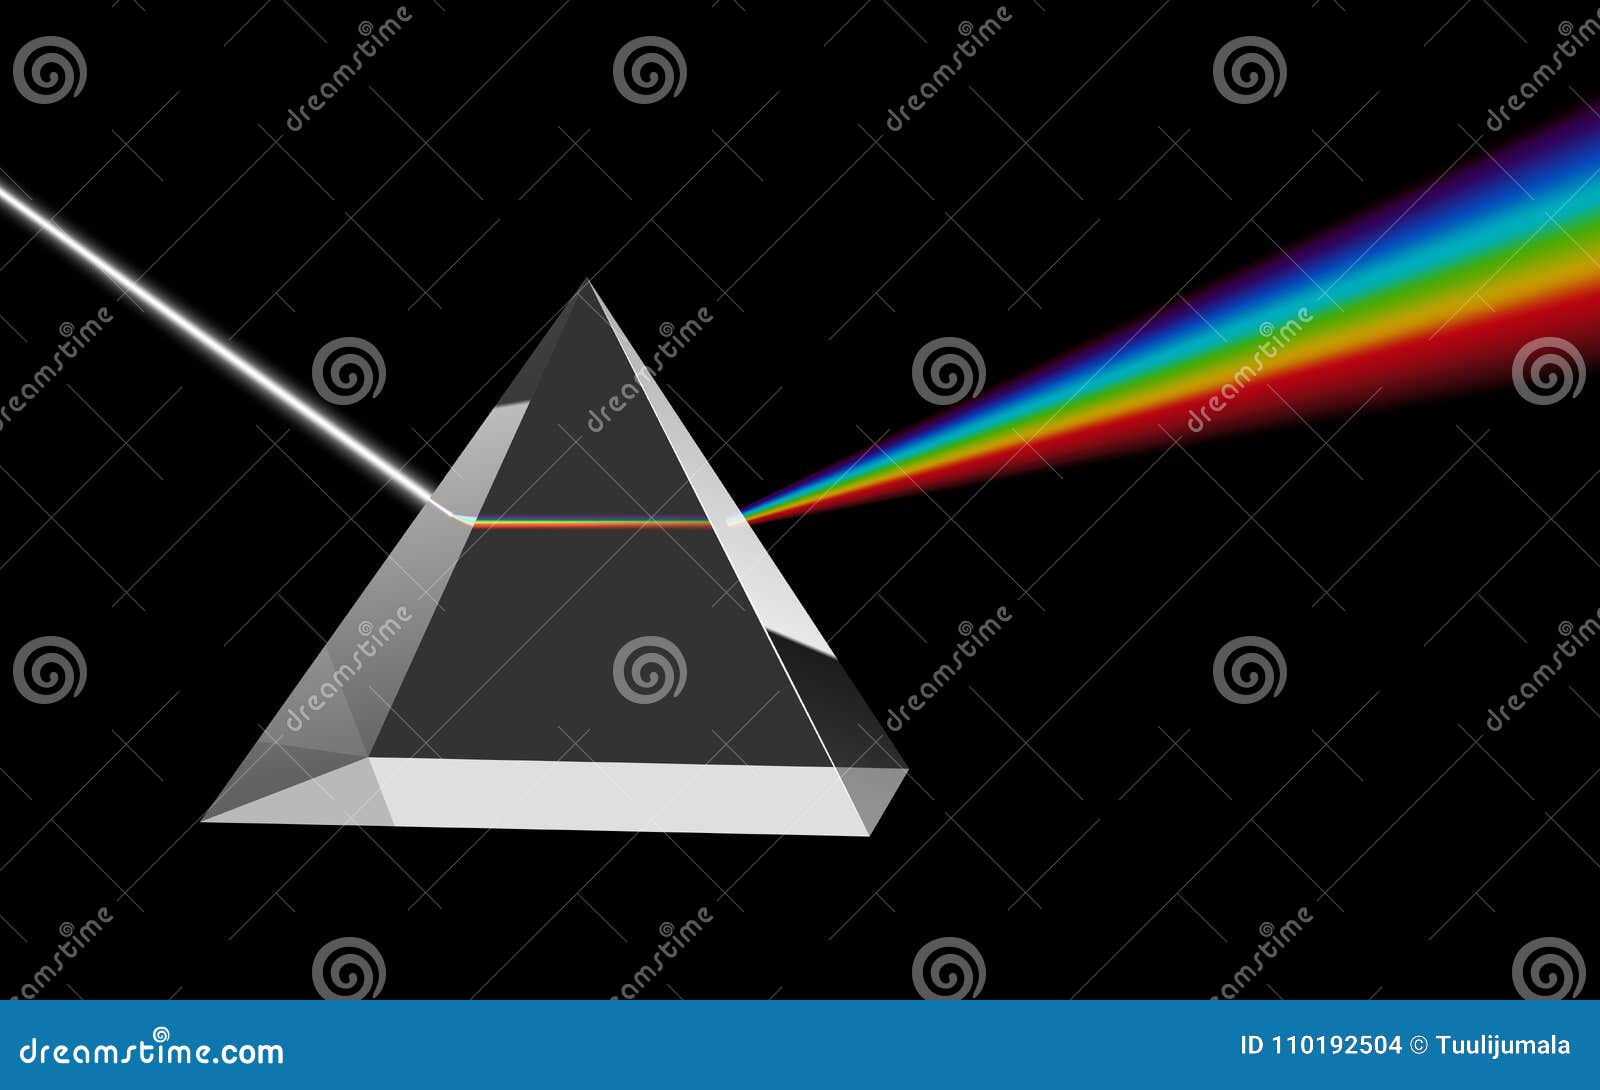 dispersion of visible light going through glass prism